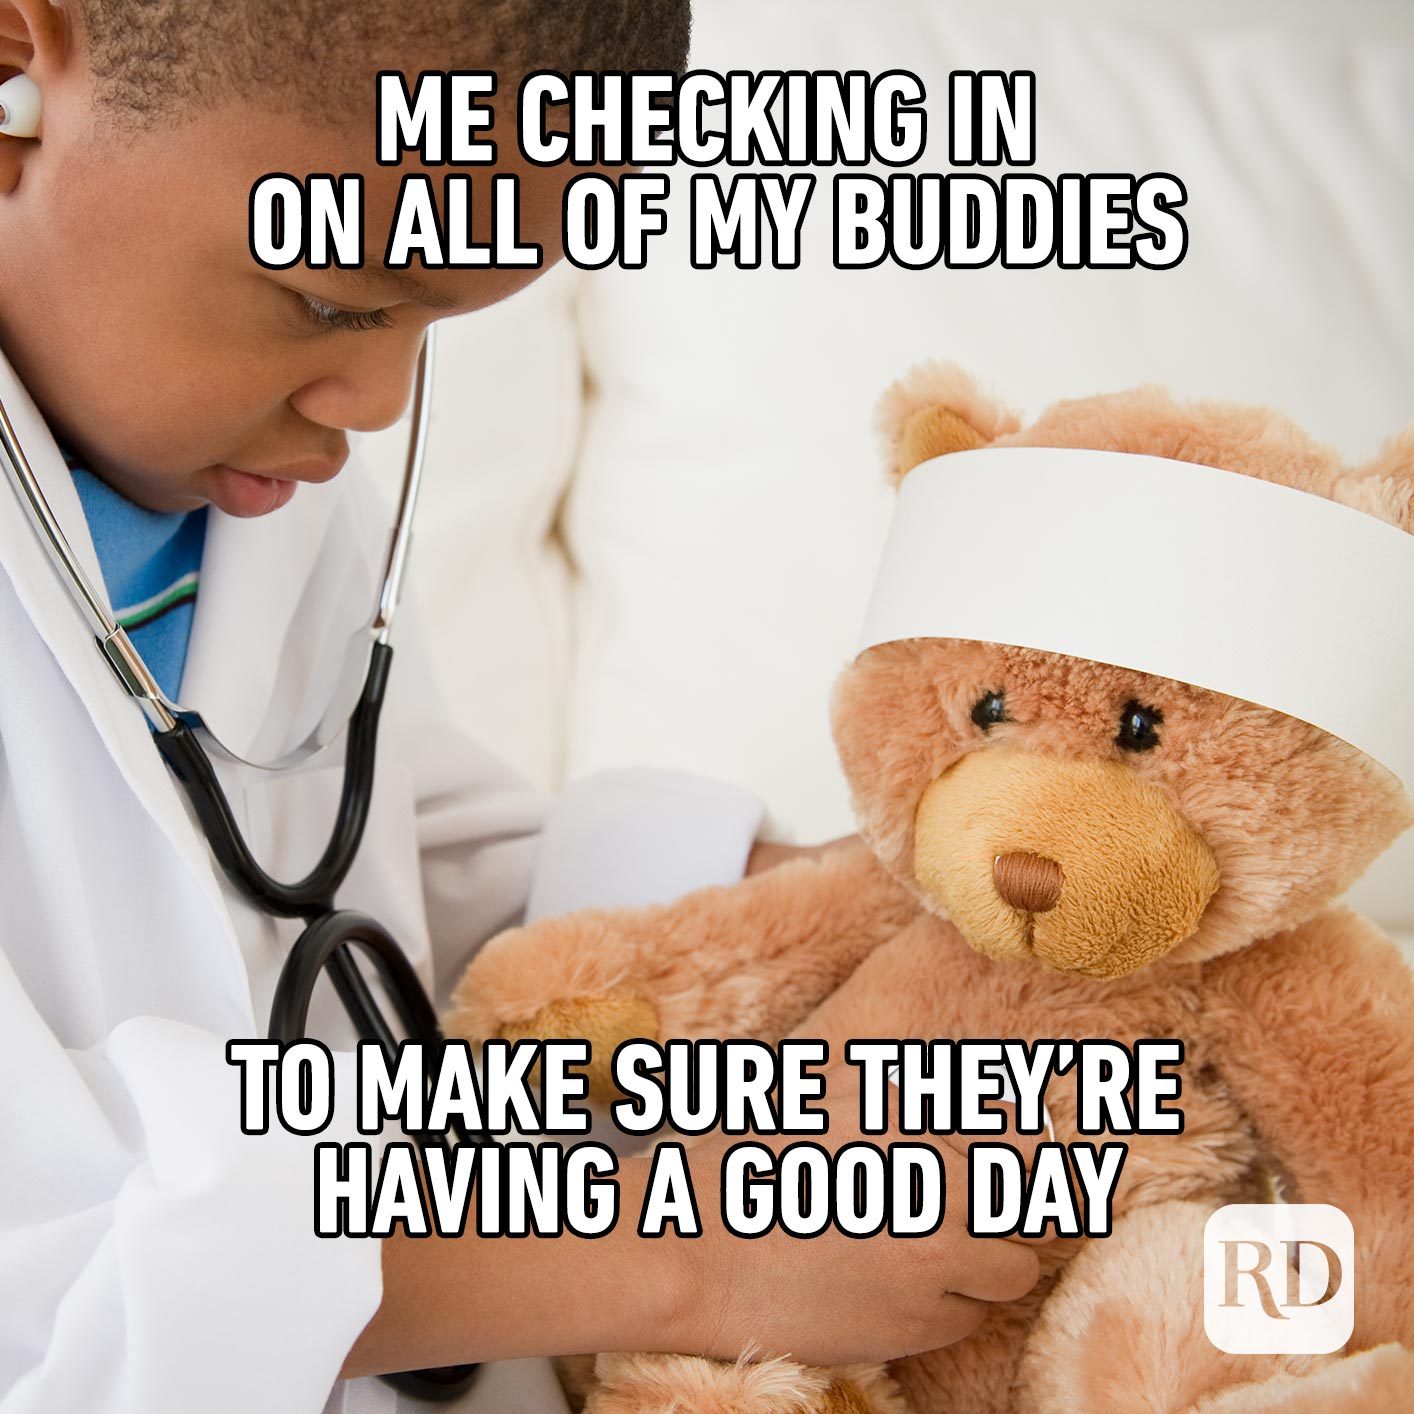 boy in doctor costume taking the temperature of his stuffed bear. Meme text: Me checking in on all of my buddies to make sure they're having a good day